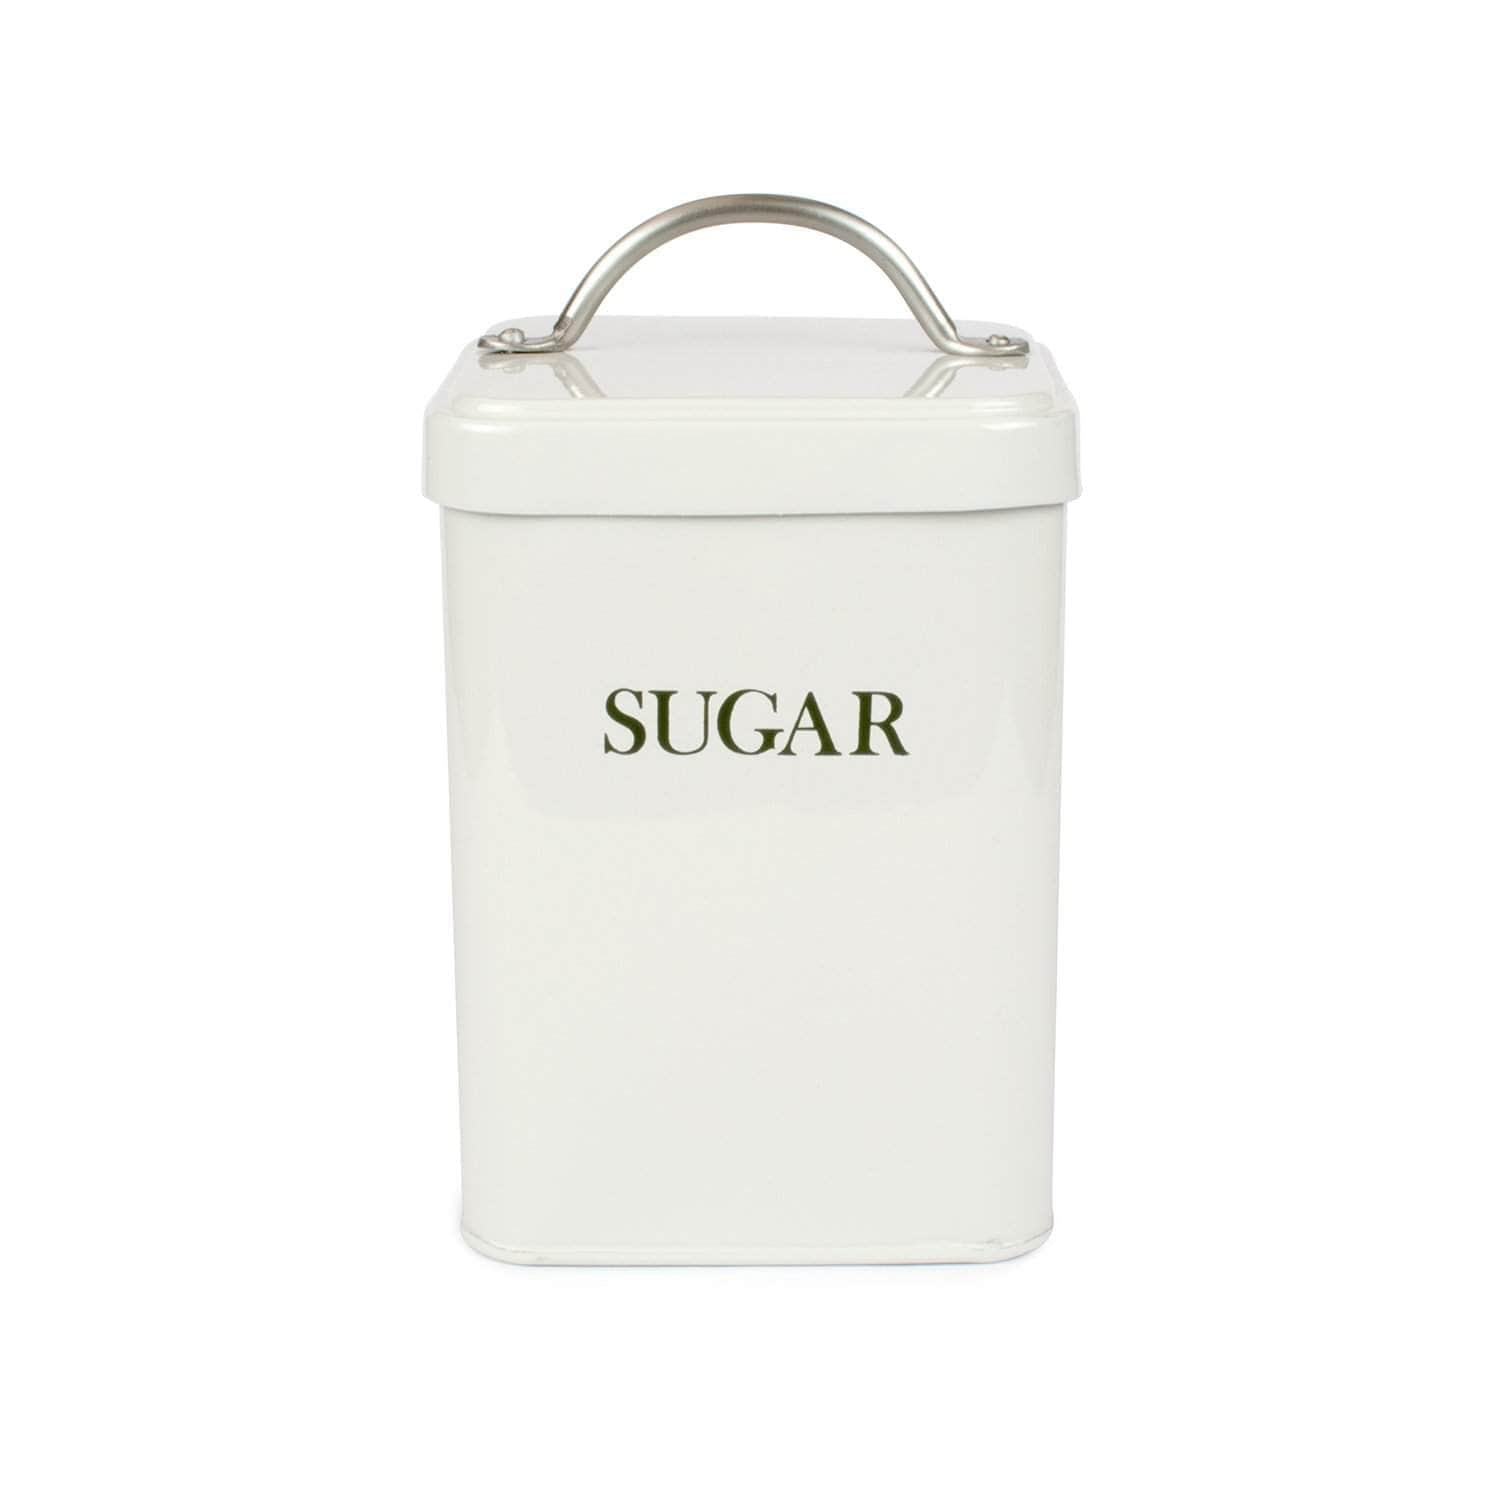 Steel sugar canister in chalk